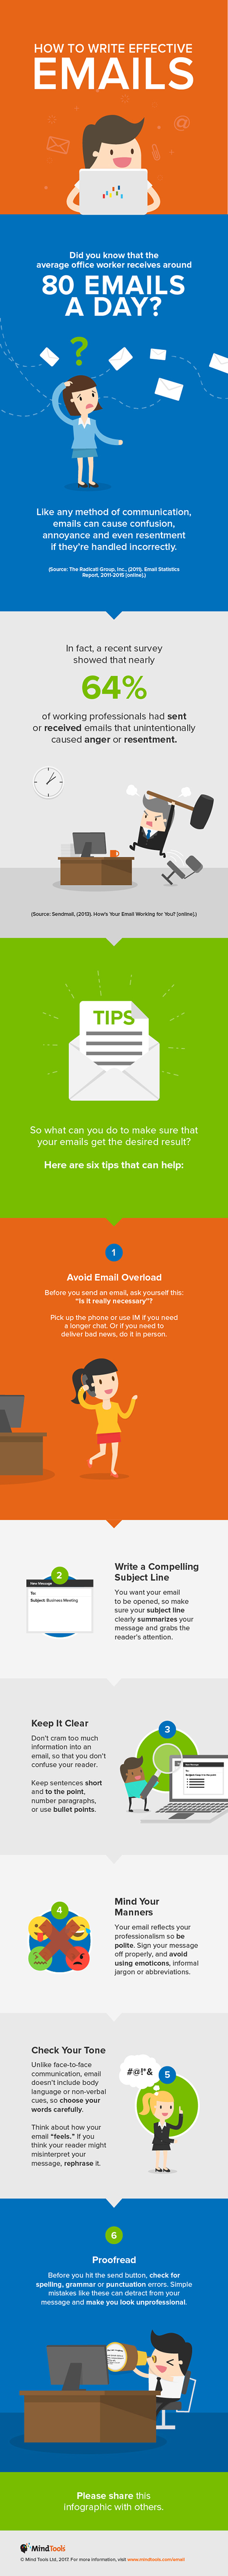 How to Write Effective Emails Infographic